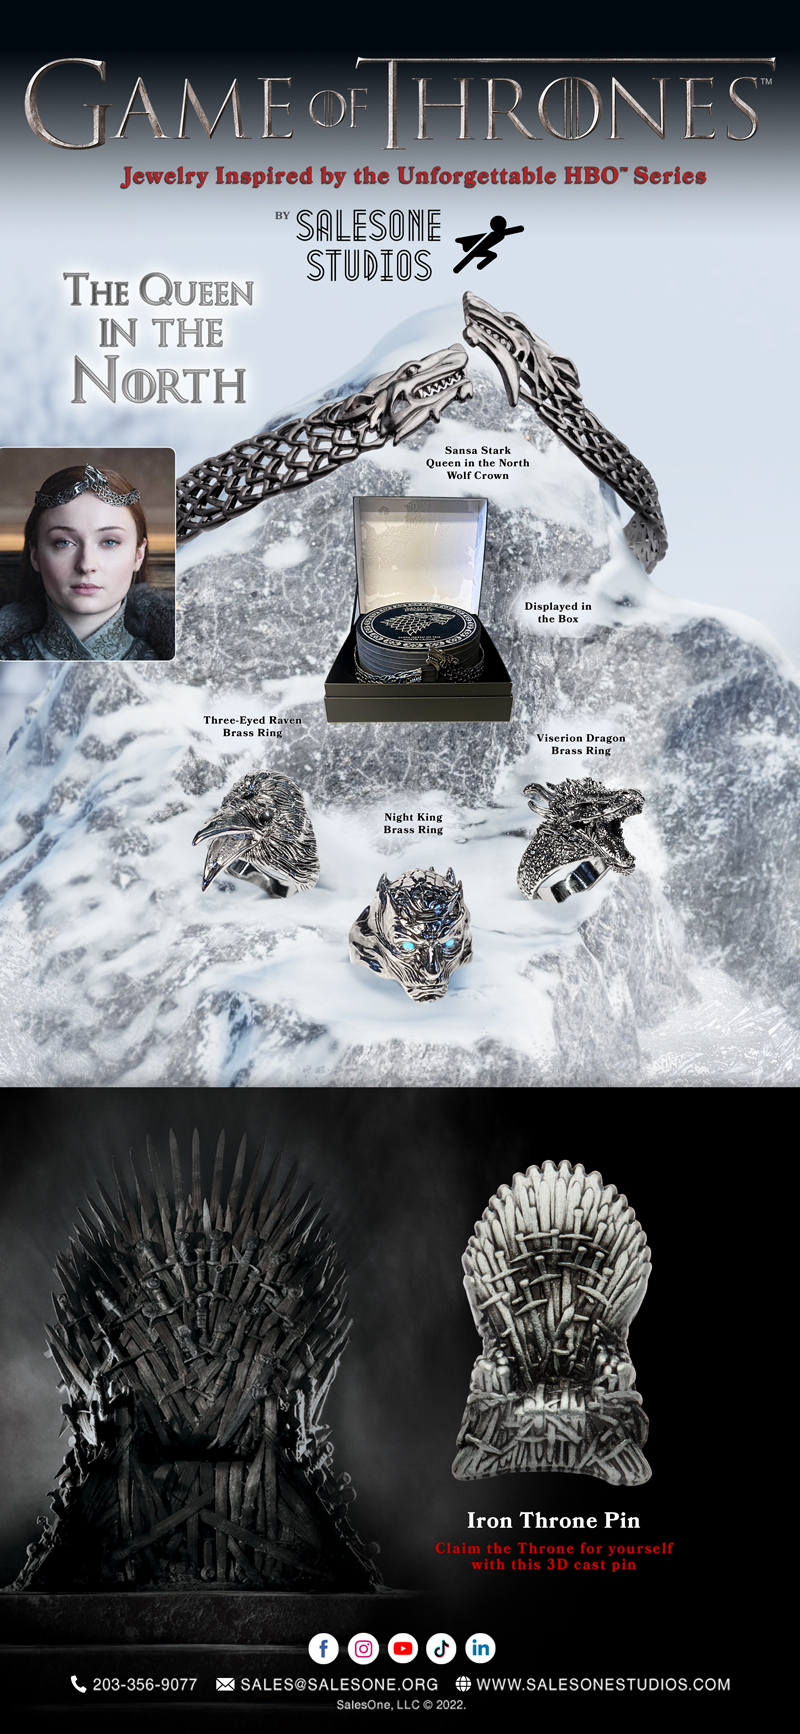 New Game of Thrones Styles Available Now On S1 Studios!